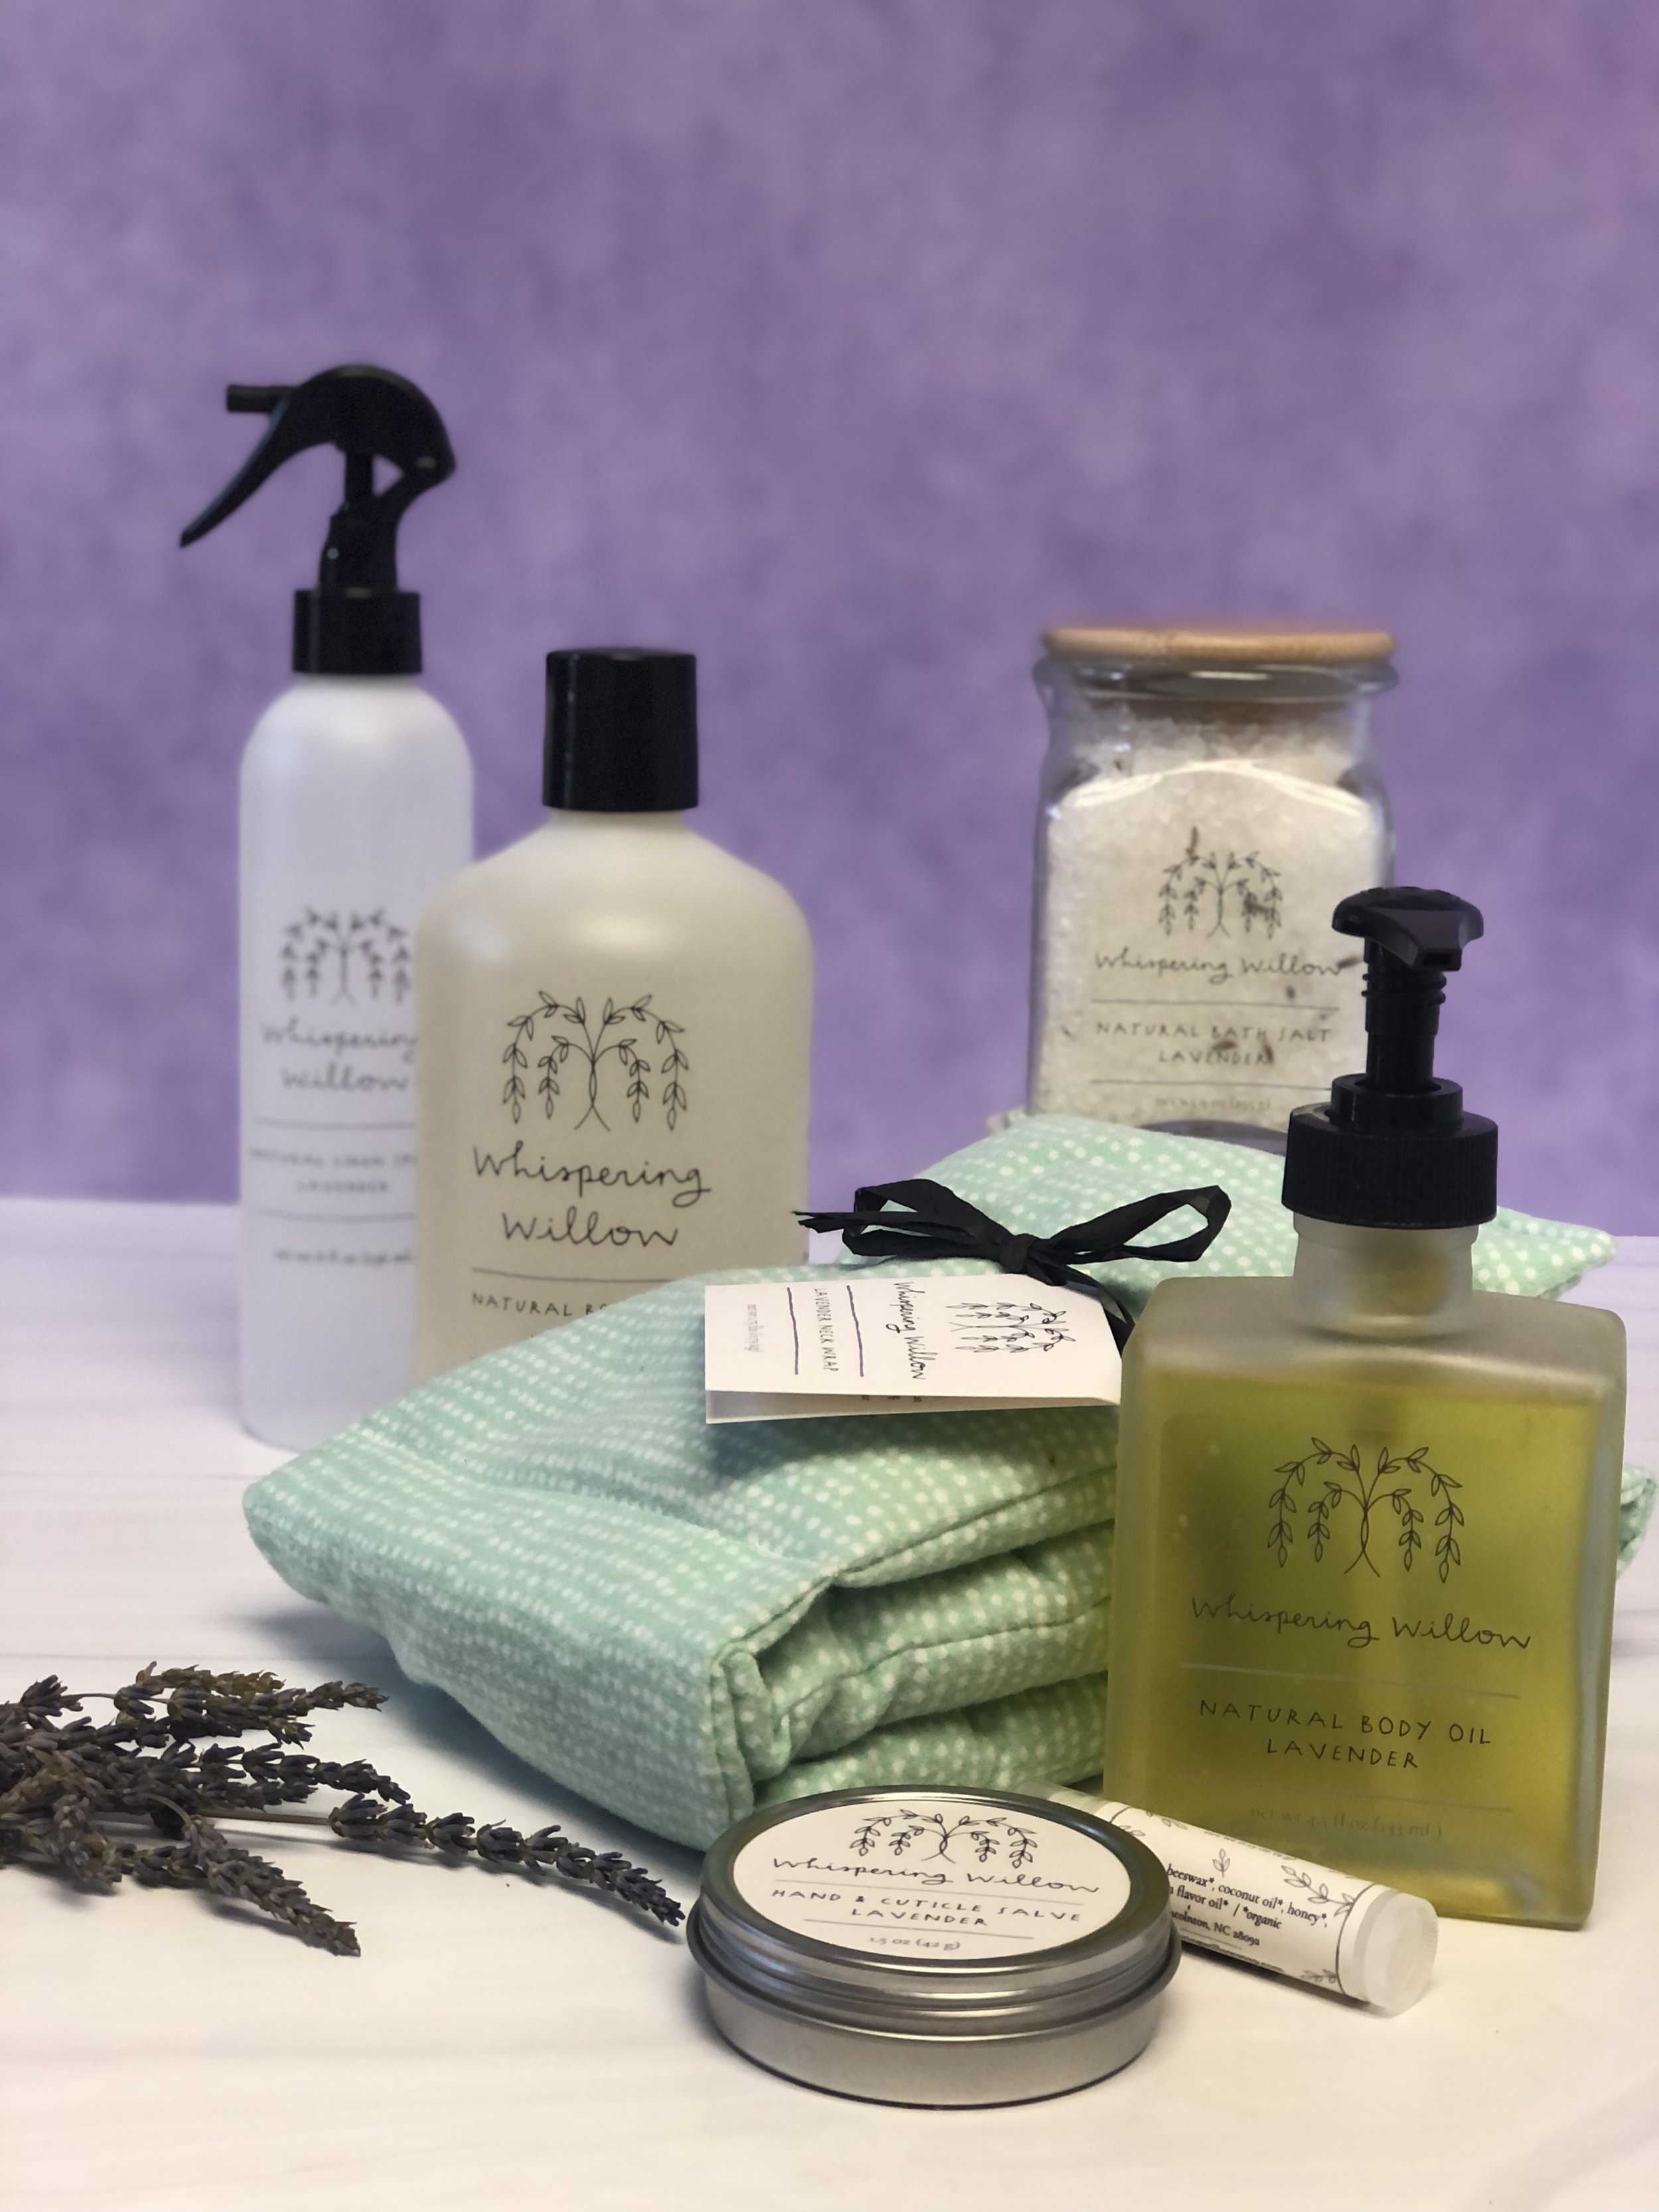 Lavender Products